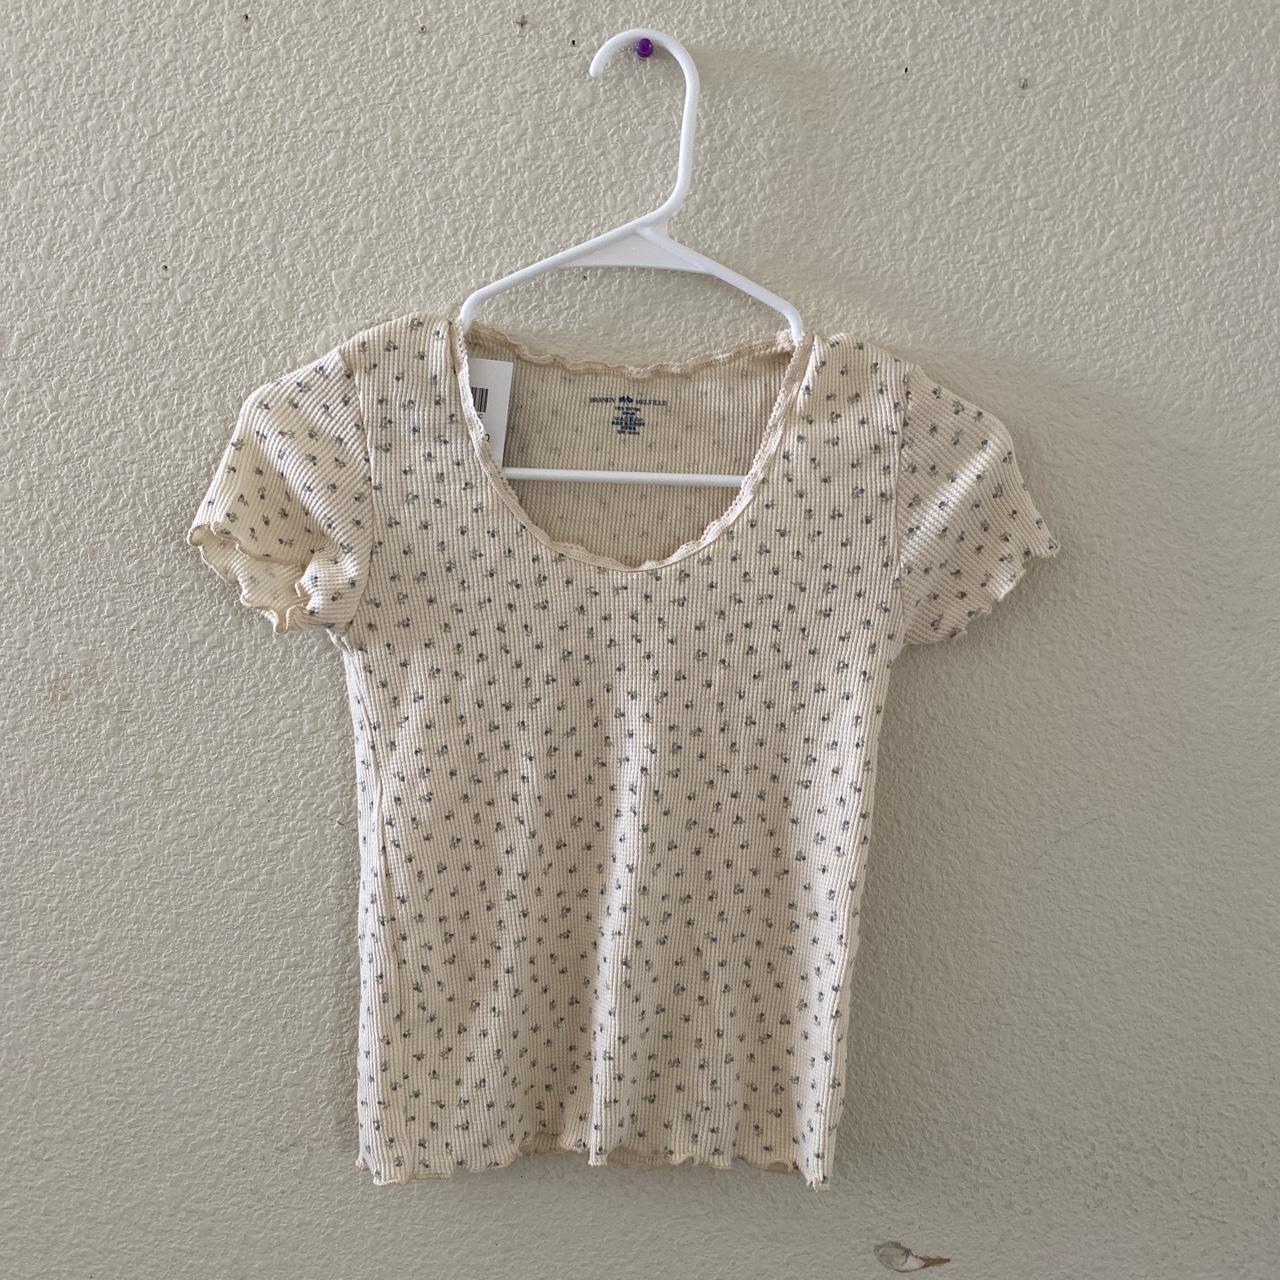 Brandy melville McKenna floral lace thermal top